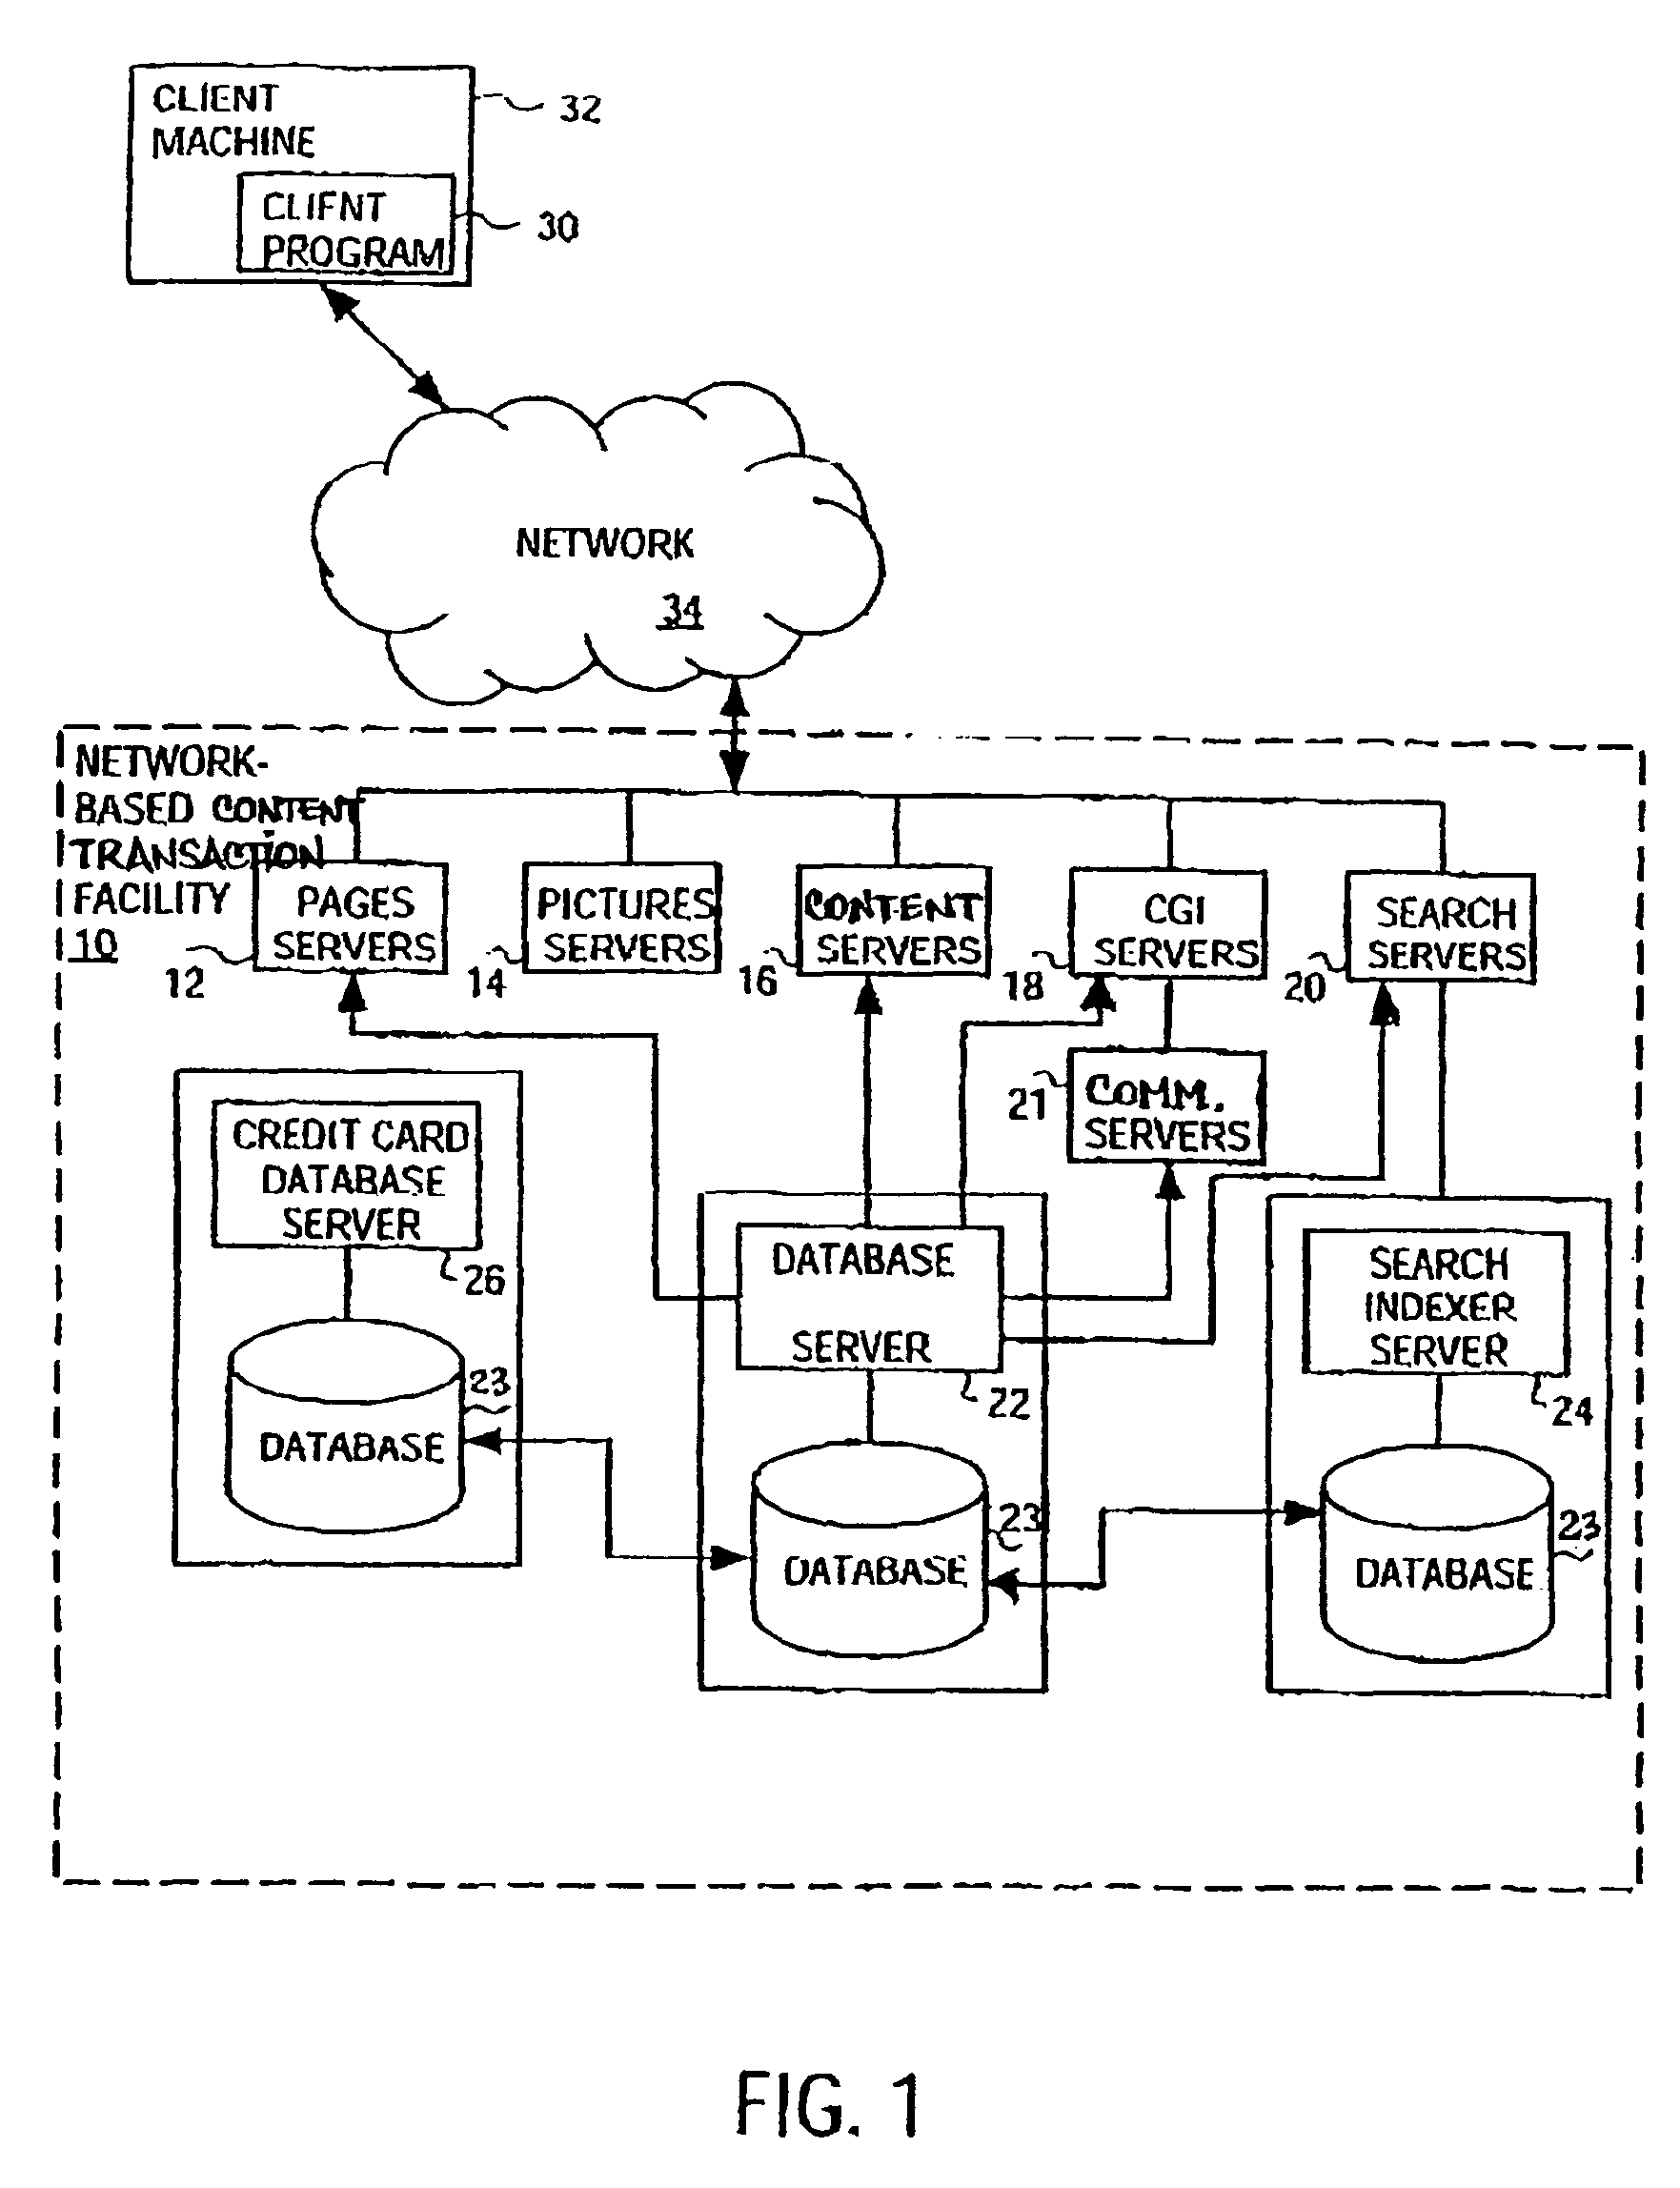 System and method to facilitate real-time communications and content sharing among users over a network